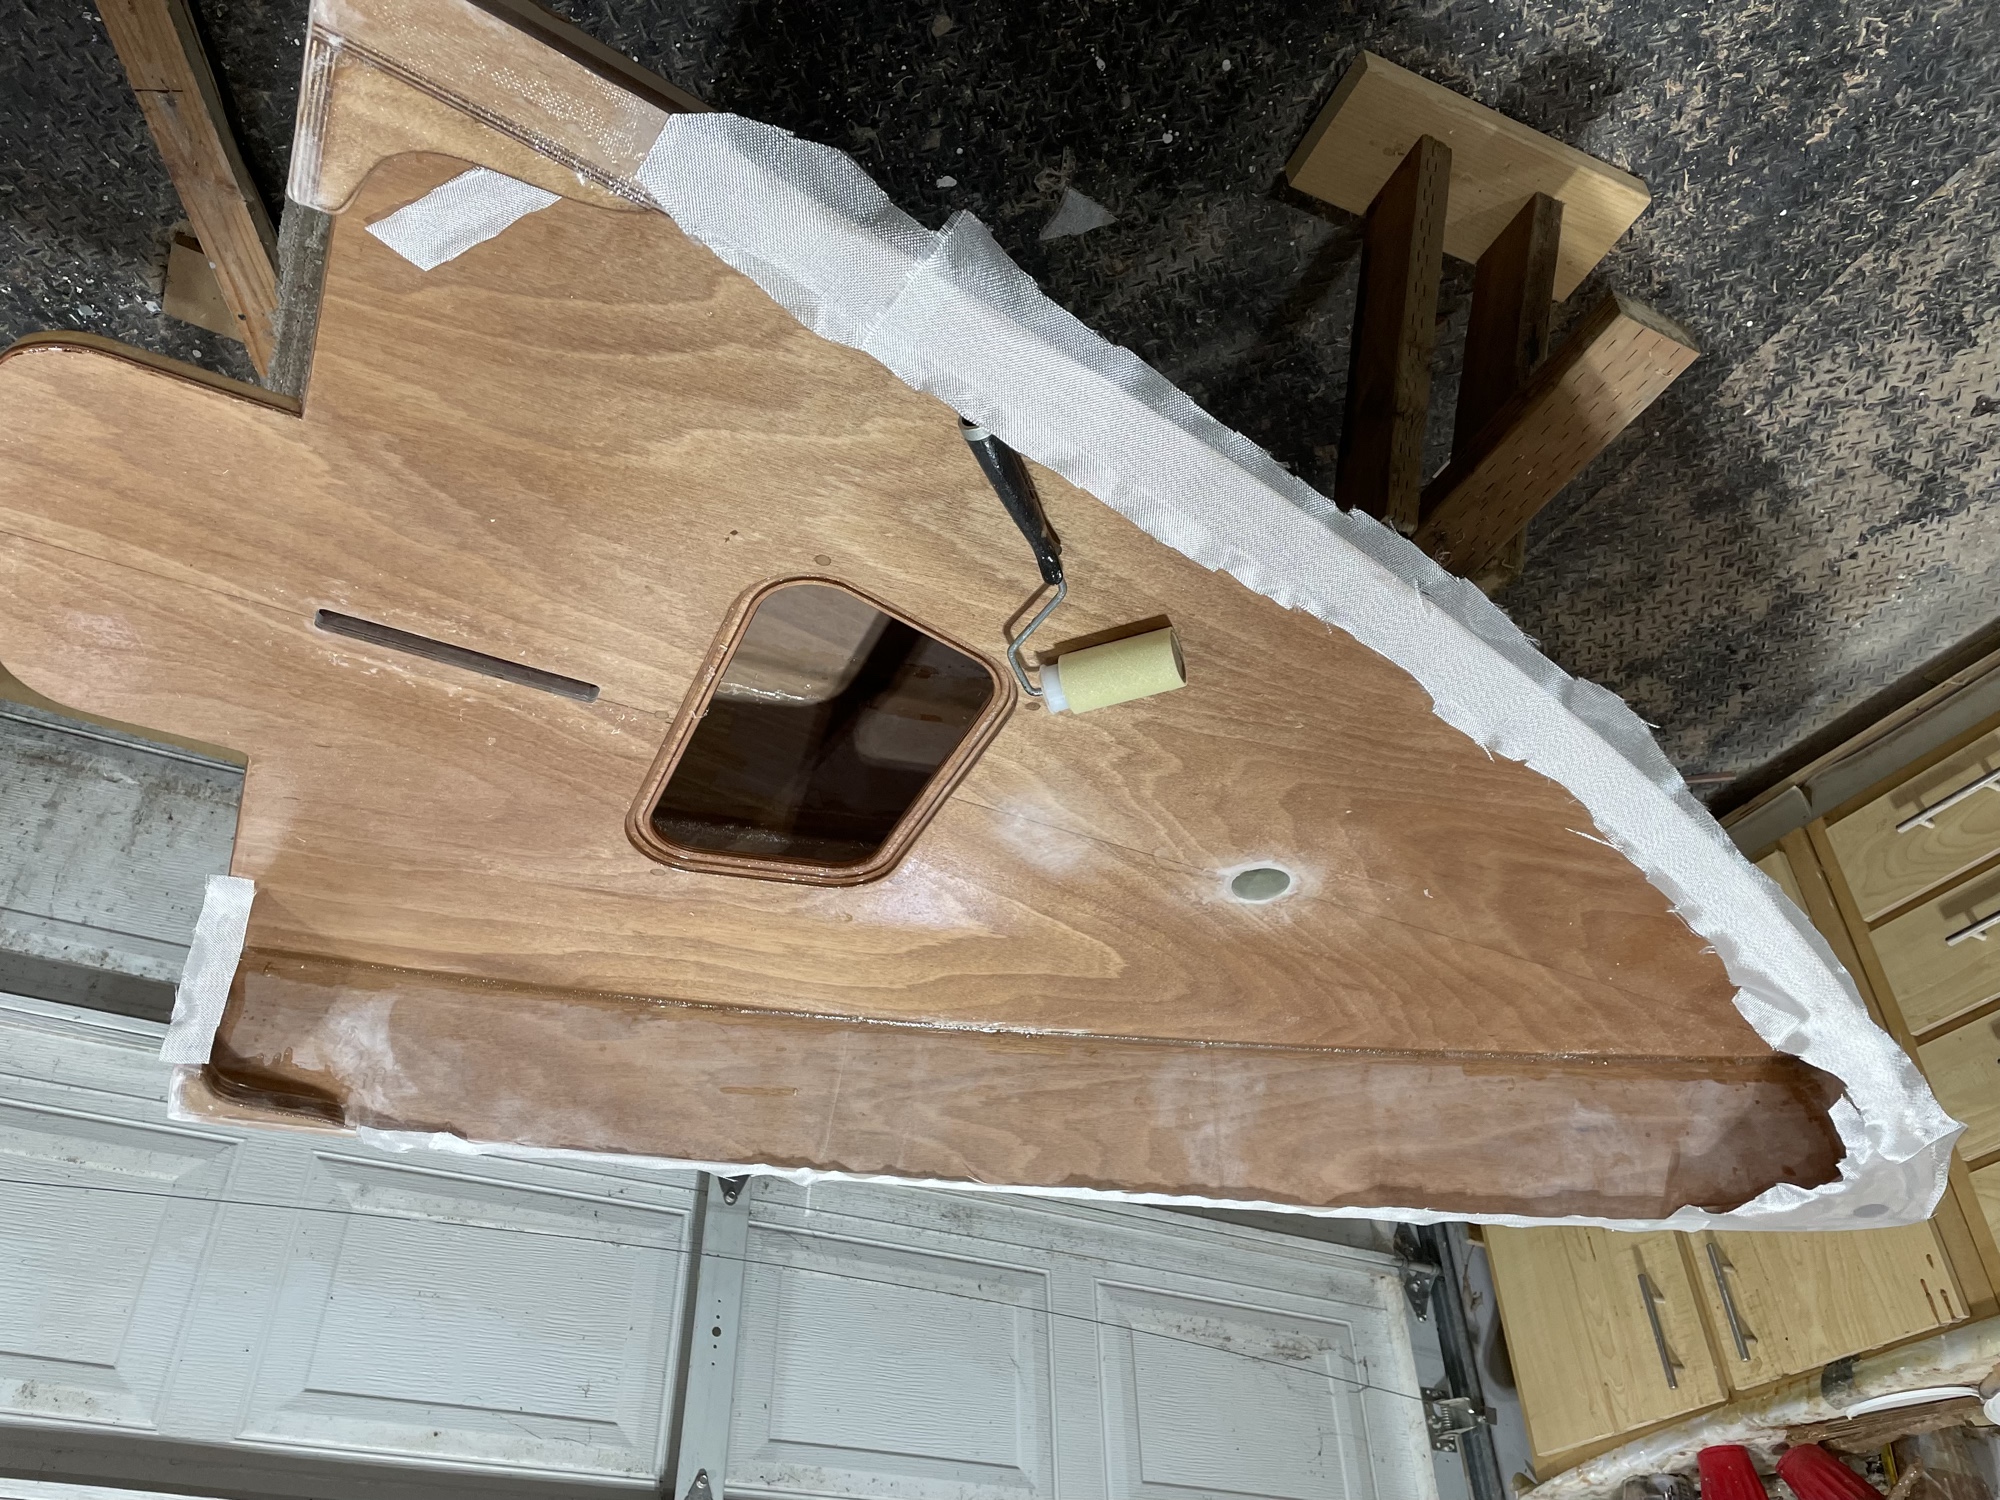  11/18/22 - The top edge of the gunwale is ready for fiberglass.  